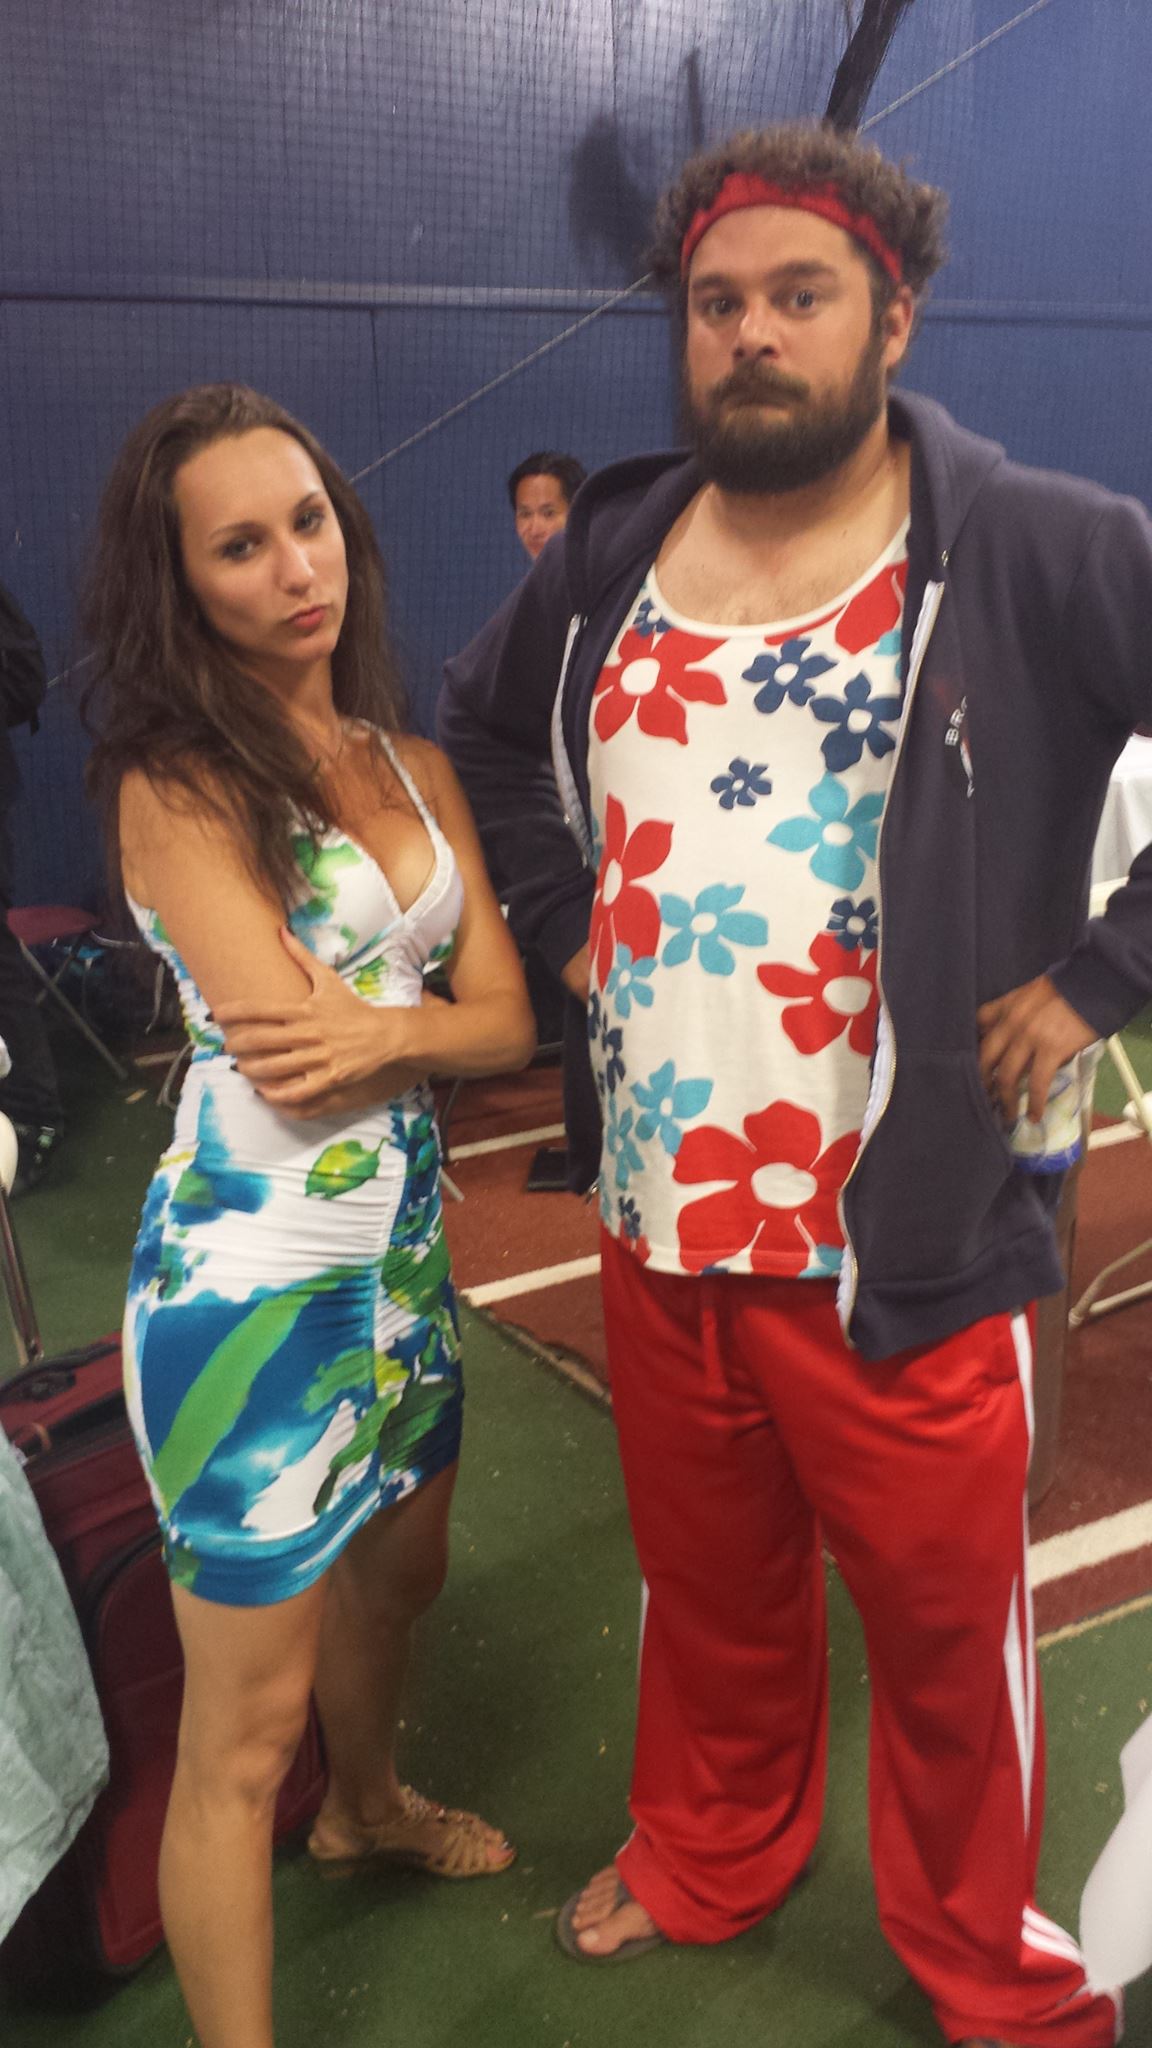 Acting tough with Bobby Moynihan on set of 